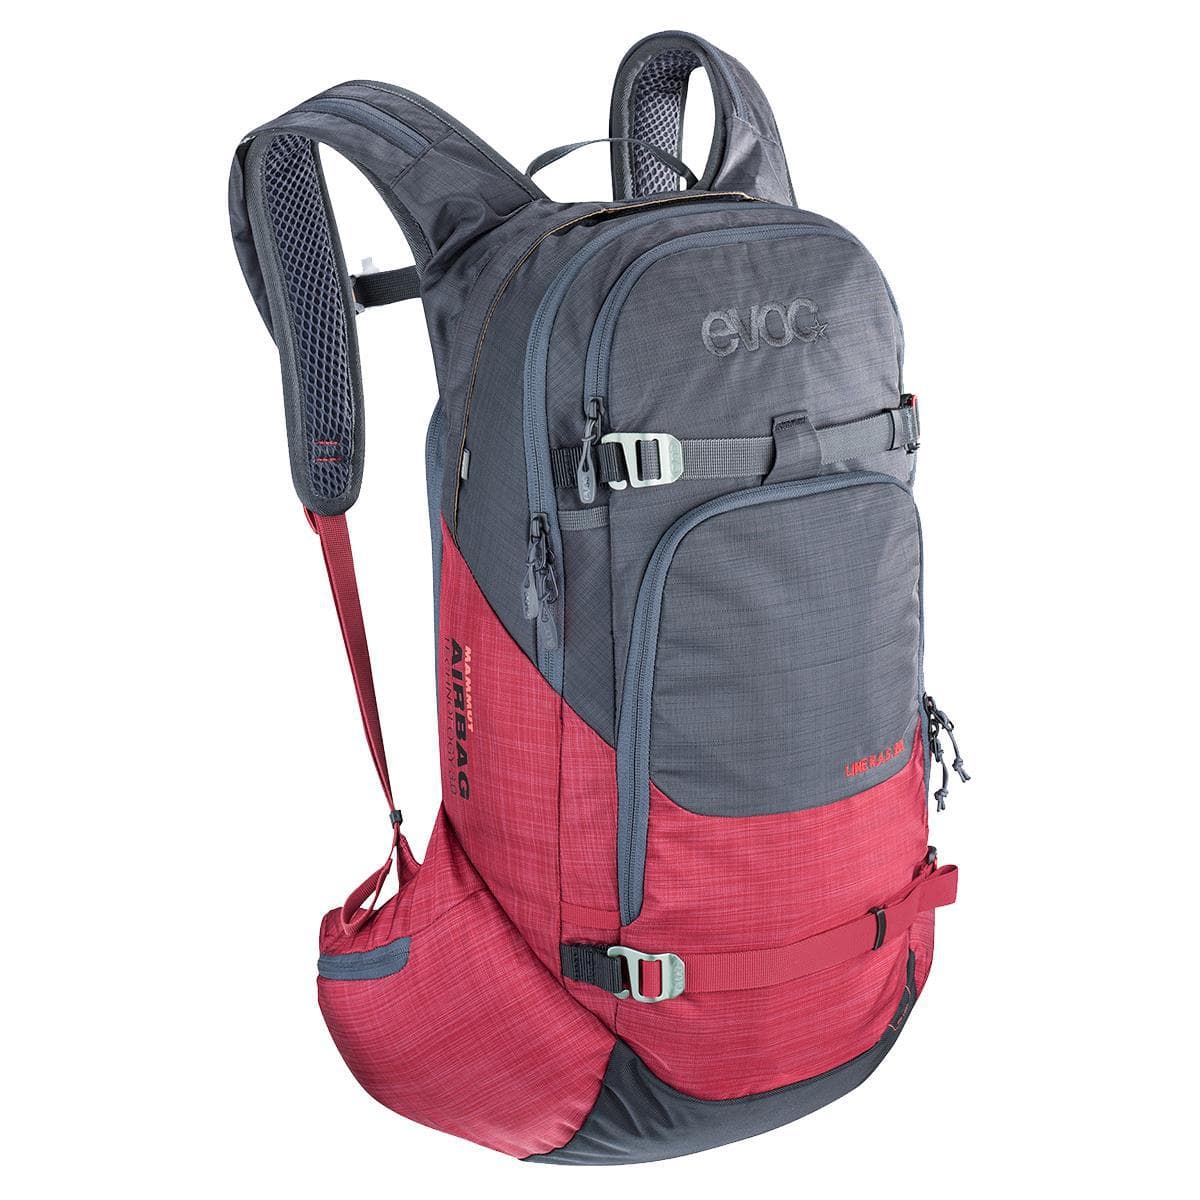 Evoc Line R.A.S. 20L Avalanche Backpack 2019: Heather Carbon Grey/Heather Ruby 20L